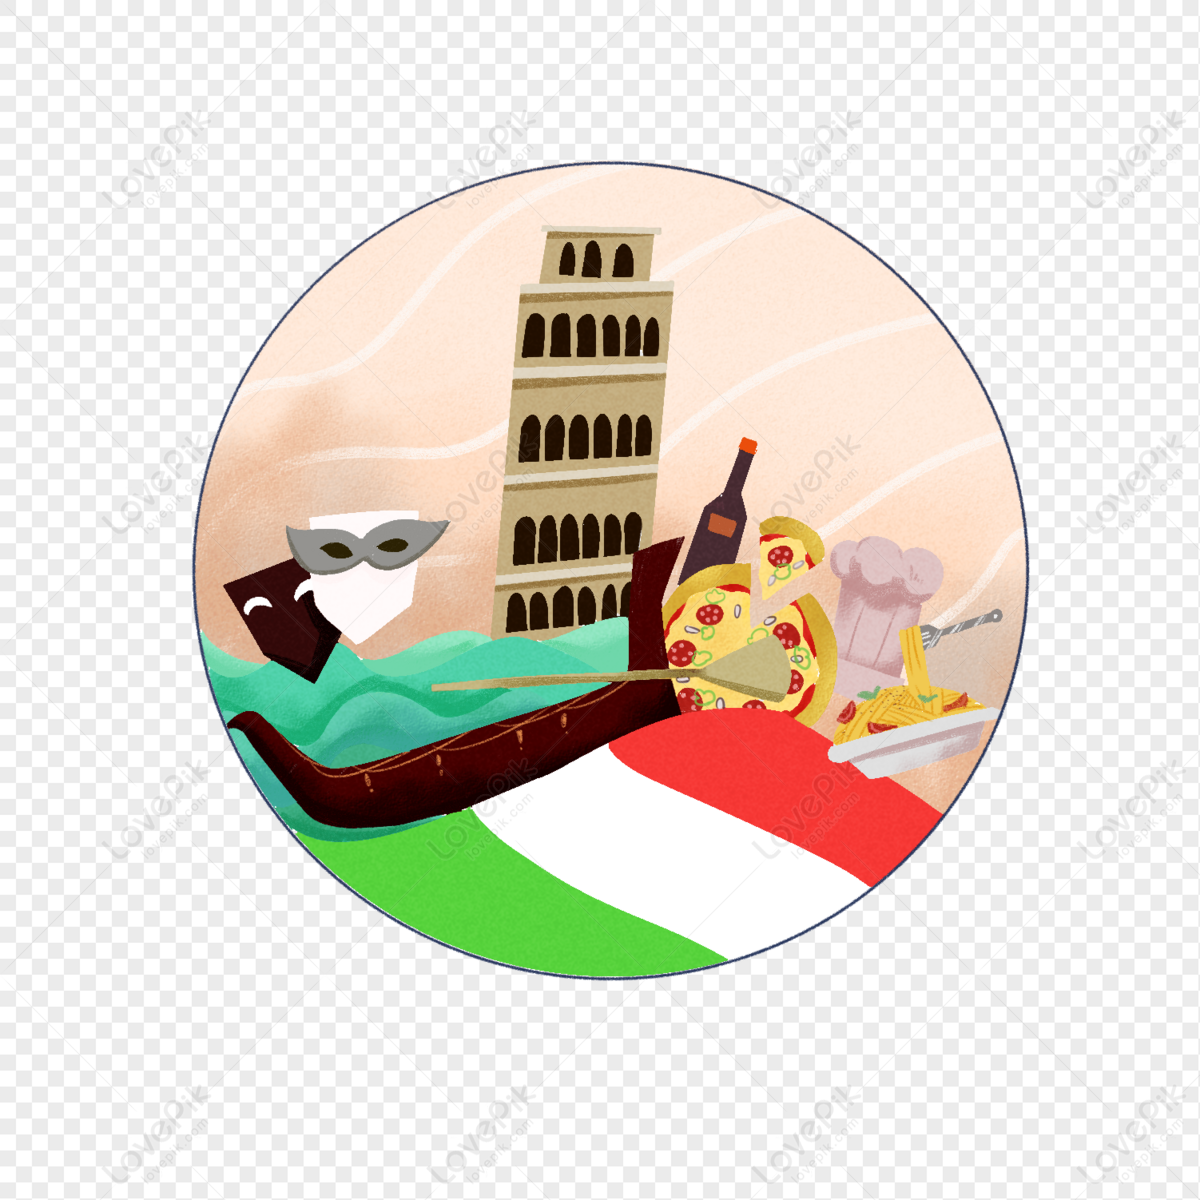 Italy Tourism, flag icon, flag italy, art icon png free download